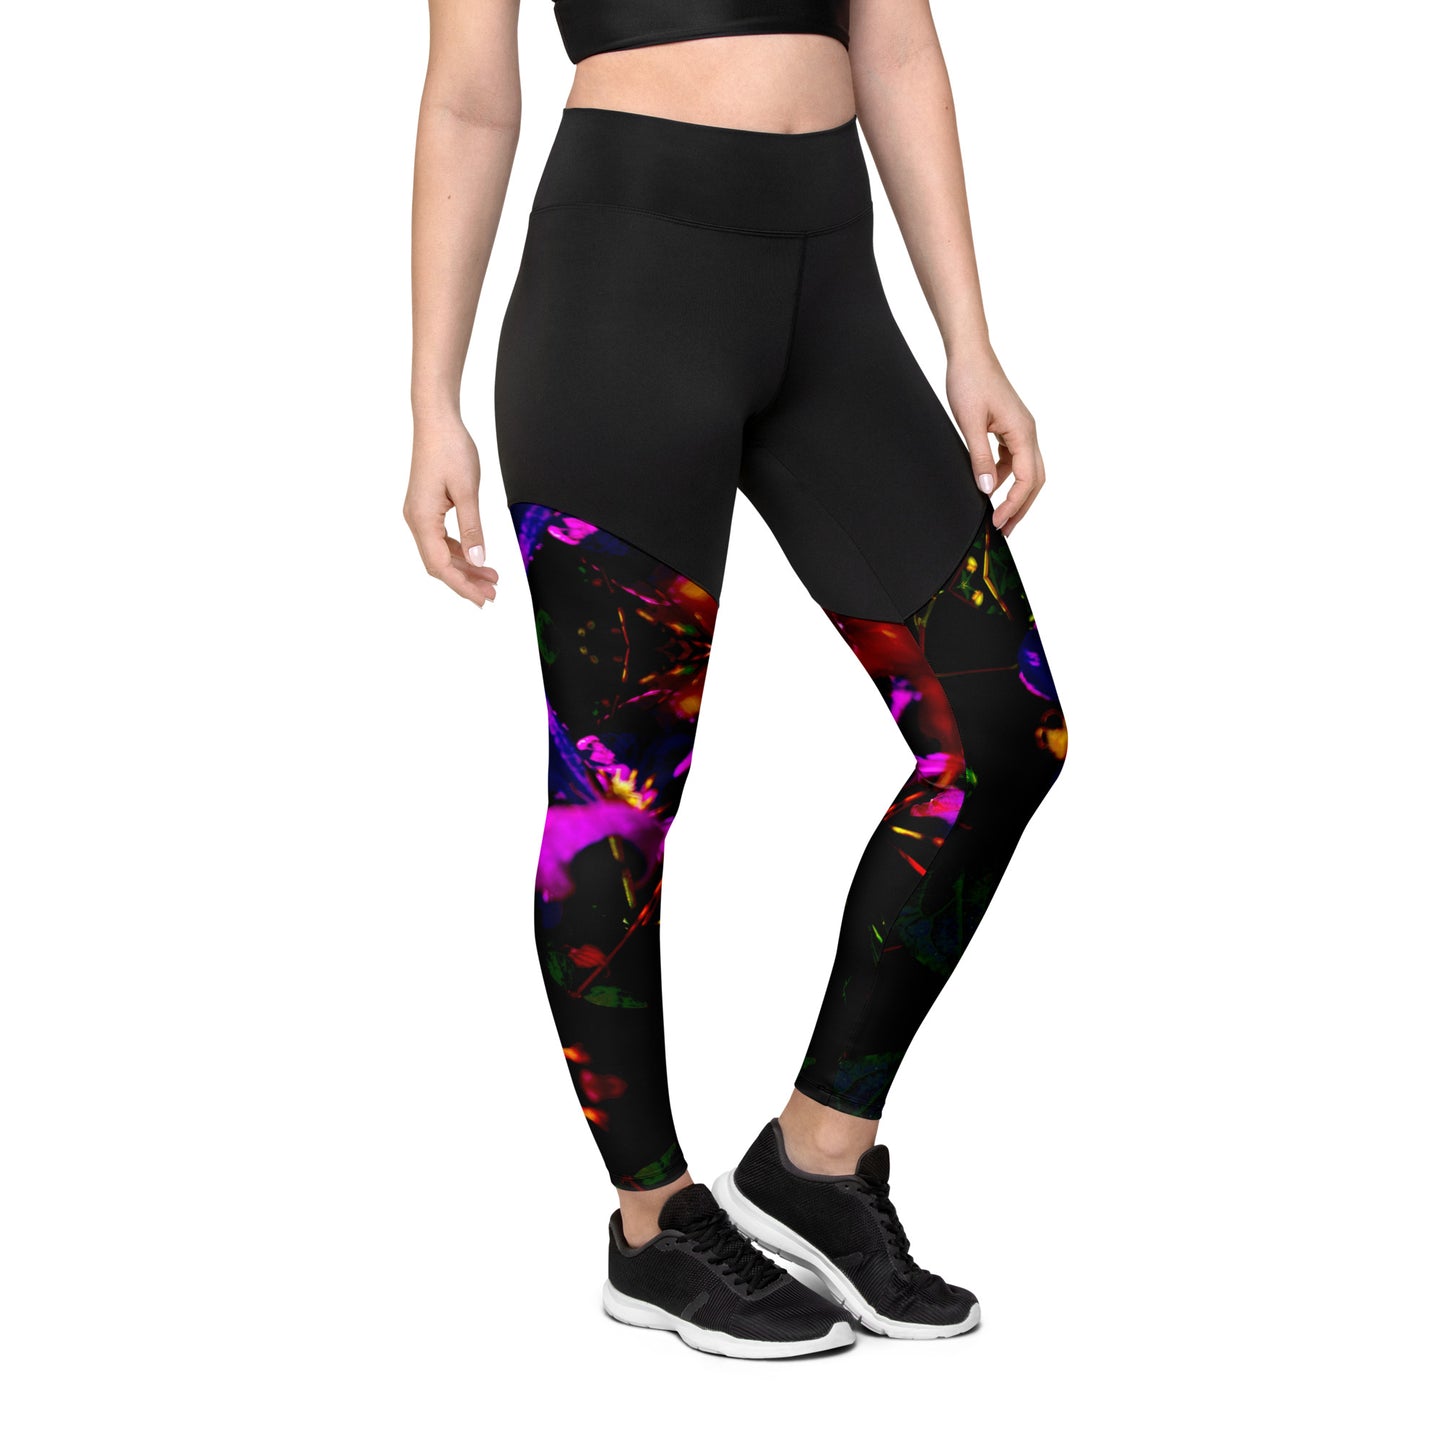 The Beauty of Ingenuity Performance Leggings with pocket